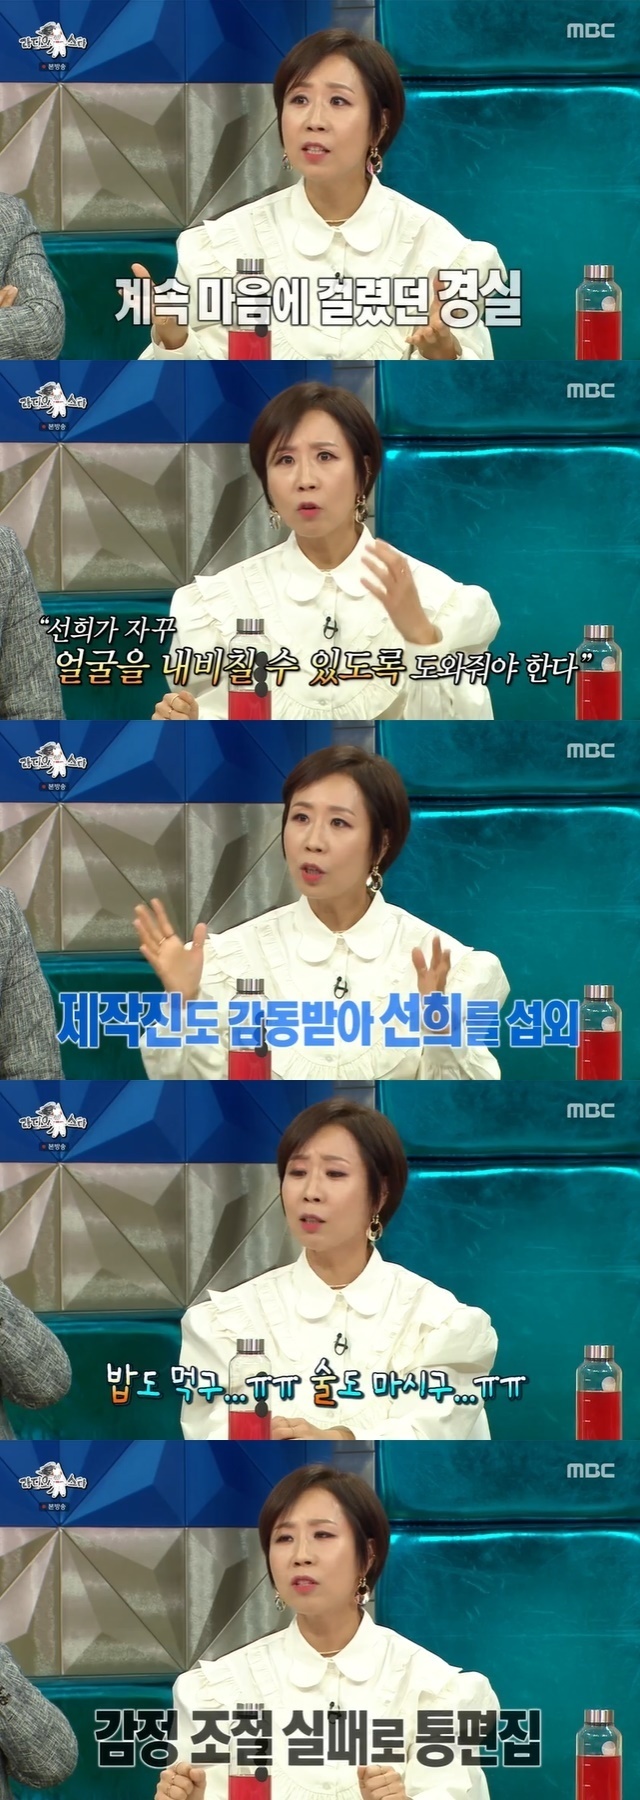 Jung Sun-hee expressed his gratitude for the Kyeong-shil Lee, who was a force when he was rumored to be a rumor at the time of the late Ahn Jae-hwans death.MBC entertainment Radio Star (hereinafter referred to as Radio Star), which was broadcast on March 16, was the 760th episode of TV to hear!Audio Star special feature An Ji-hwan, Jung Sun-hee, Yoon Min-soo and Jang Ye-won appeared as guests.On this day, Jung Sun-hee asked me to do a simulation around him, saying, There are a lot of characters around.I think it is a furnace, he said. When I was in a difficult time, I was more angry than I was. Jung Sun-hee said, When I was resting, I had a three wheel telephone interview quiz (Kyeong-shil Lee) to remind me of Jung Sun-hee.Im so impressed. Im just getting touched by the crew, so Im having dinner outside because its my friends birthday.I was going to go to the quiz, but I made good use of it. Kyeong-shil Lee talked a lot about Jung Sun-hee. Ill change it.The moment I called and said,  (I) Sister my sister burst. Our Sunhee, yeah, turn around. Yeah, turn around.I ate rice, drank alcohol, and (so) the atmosphere of the scene was getting worse. My sister tried to help me, but she was edited because of her failure to control her emotions.This story spreads and Kim Young-chul and others (playing along with Kyeong-shil Lee every time I call) to me. Jung Sun-hee also said, There were many people who once gave me a daughter-like heart.A decade has passed, and he was eating at a restaurant, and he saw me over there and (crying) came to me.I was so swept away that I thought it would be a fire. 